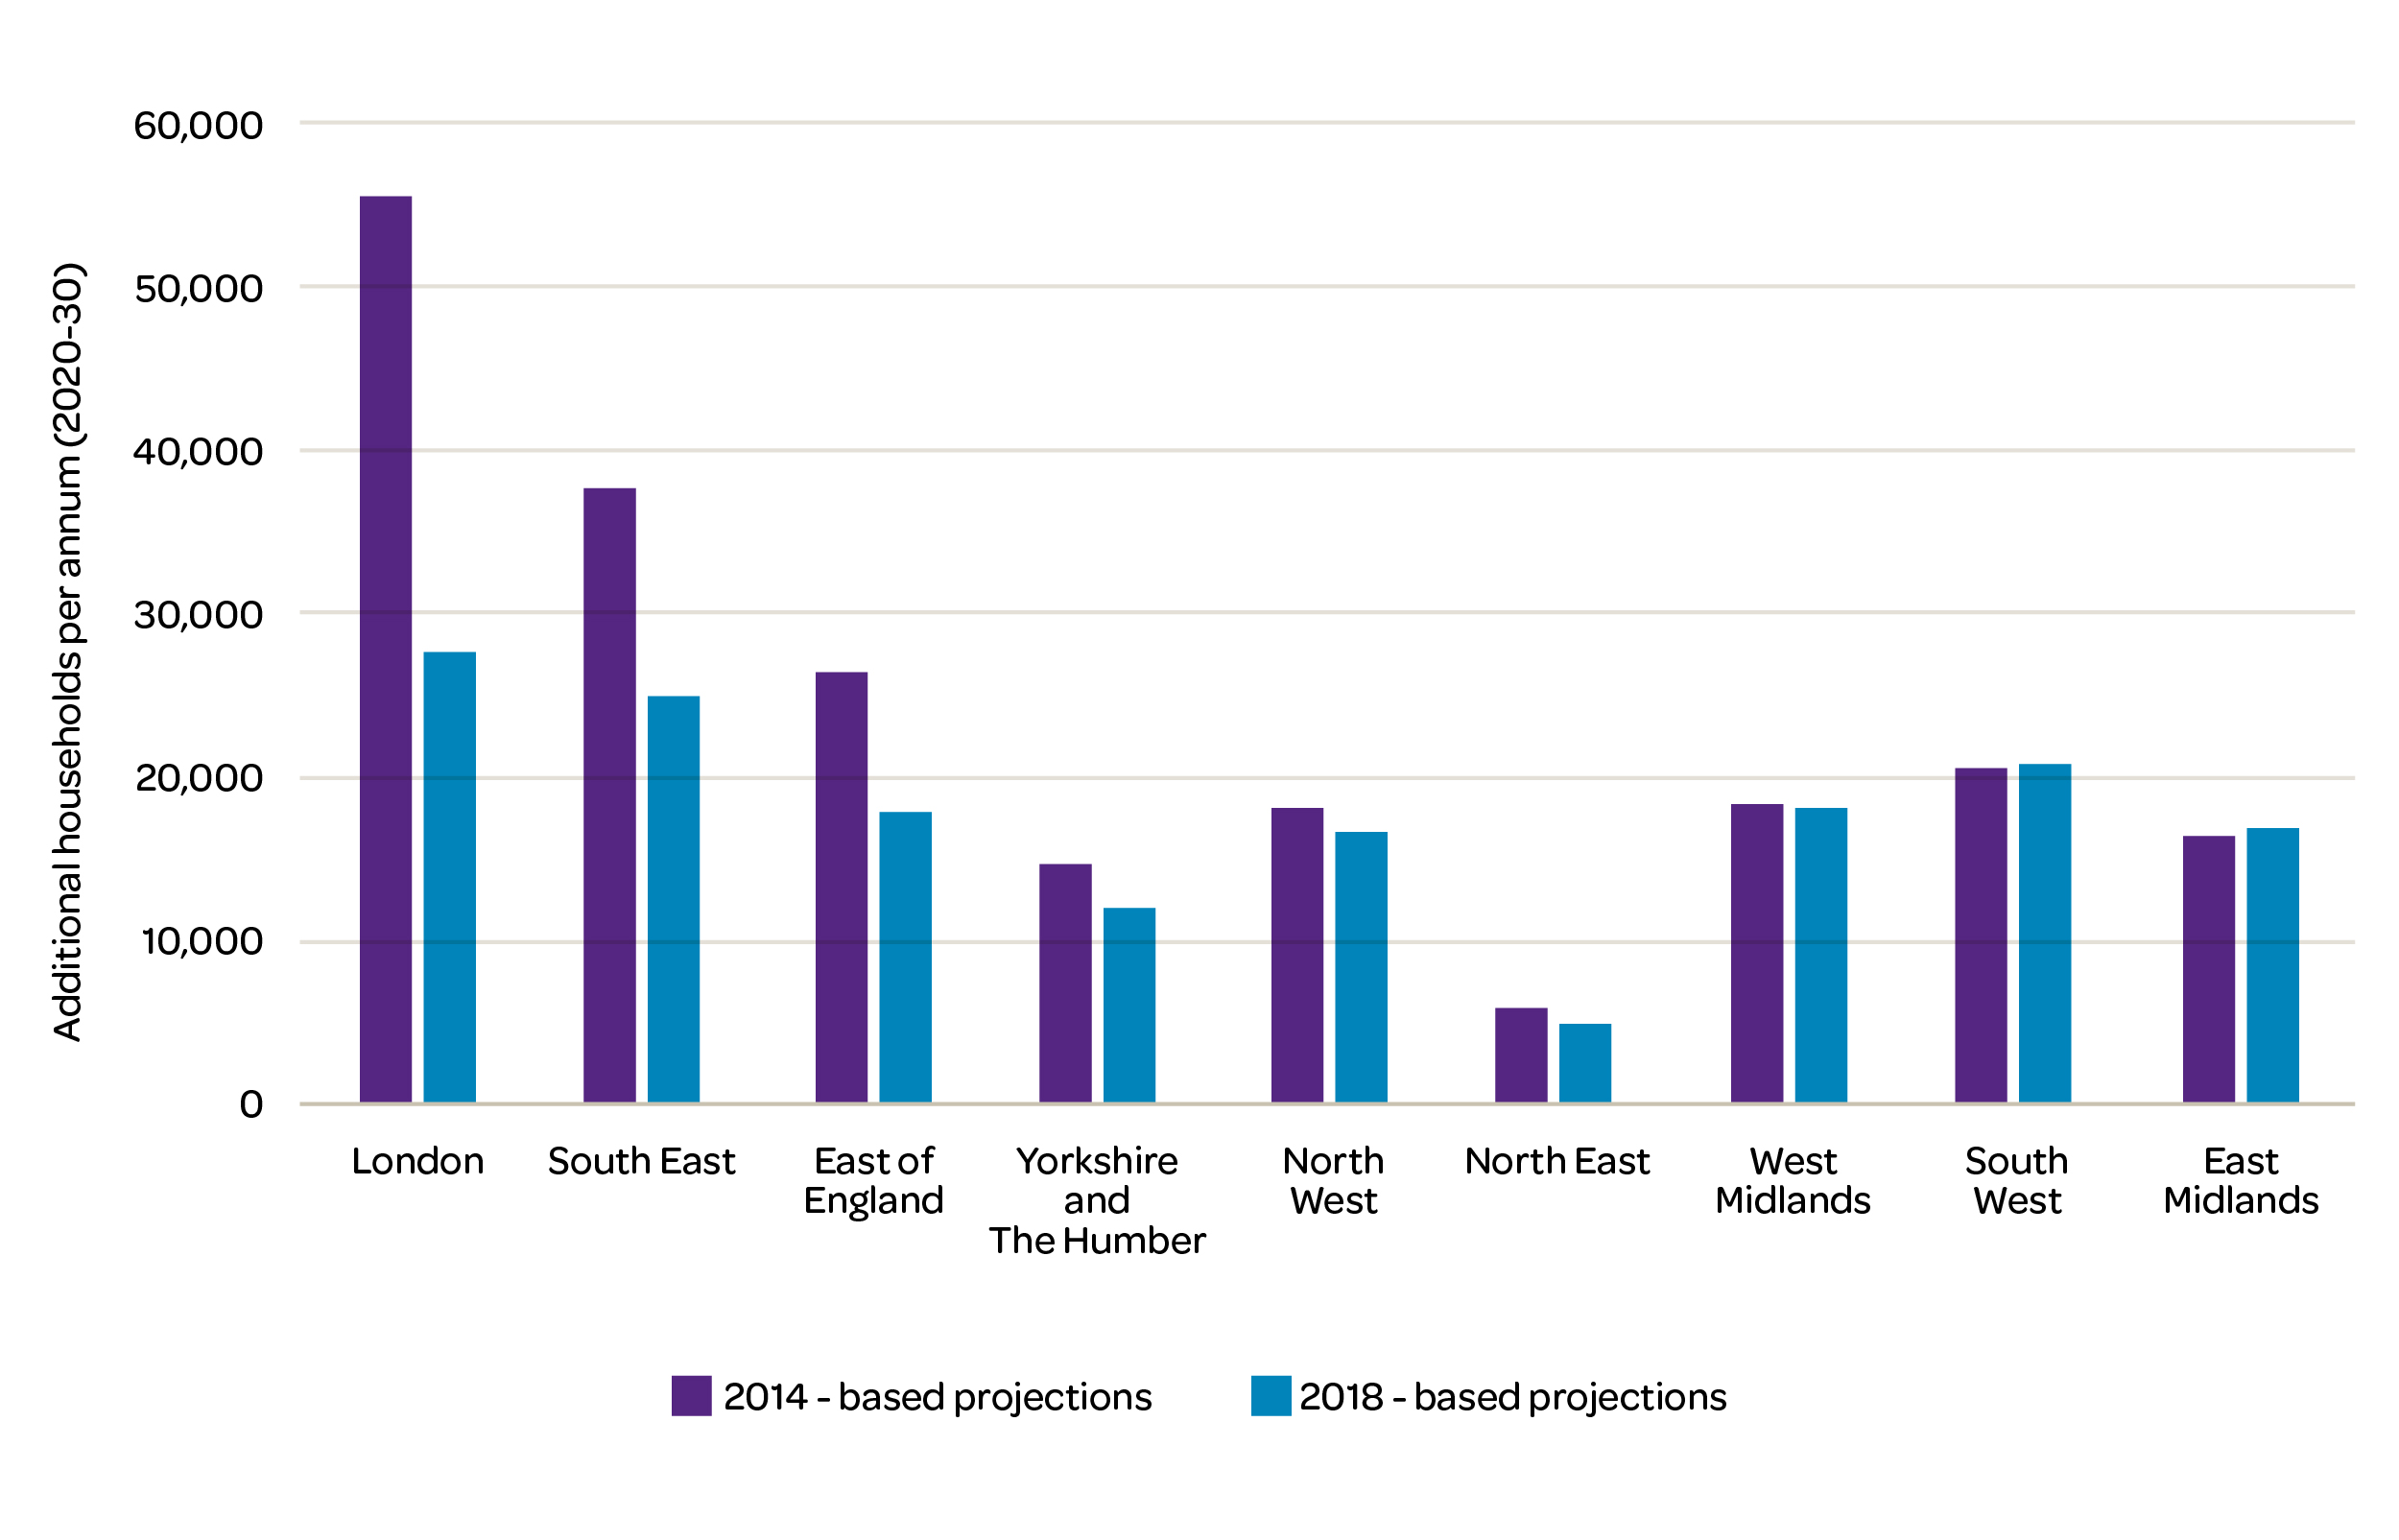 Figure 1: Change between 2014-based and 2018-based projections by region